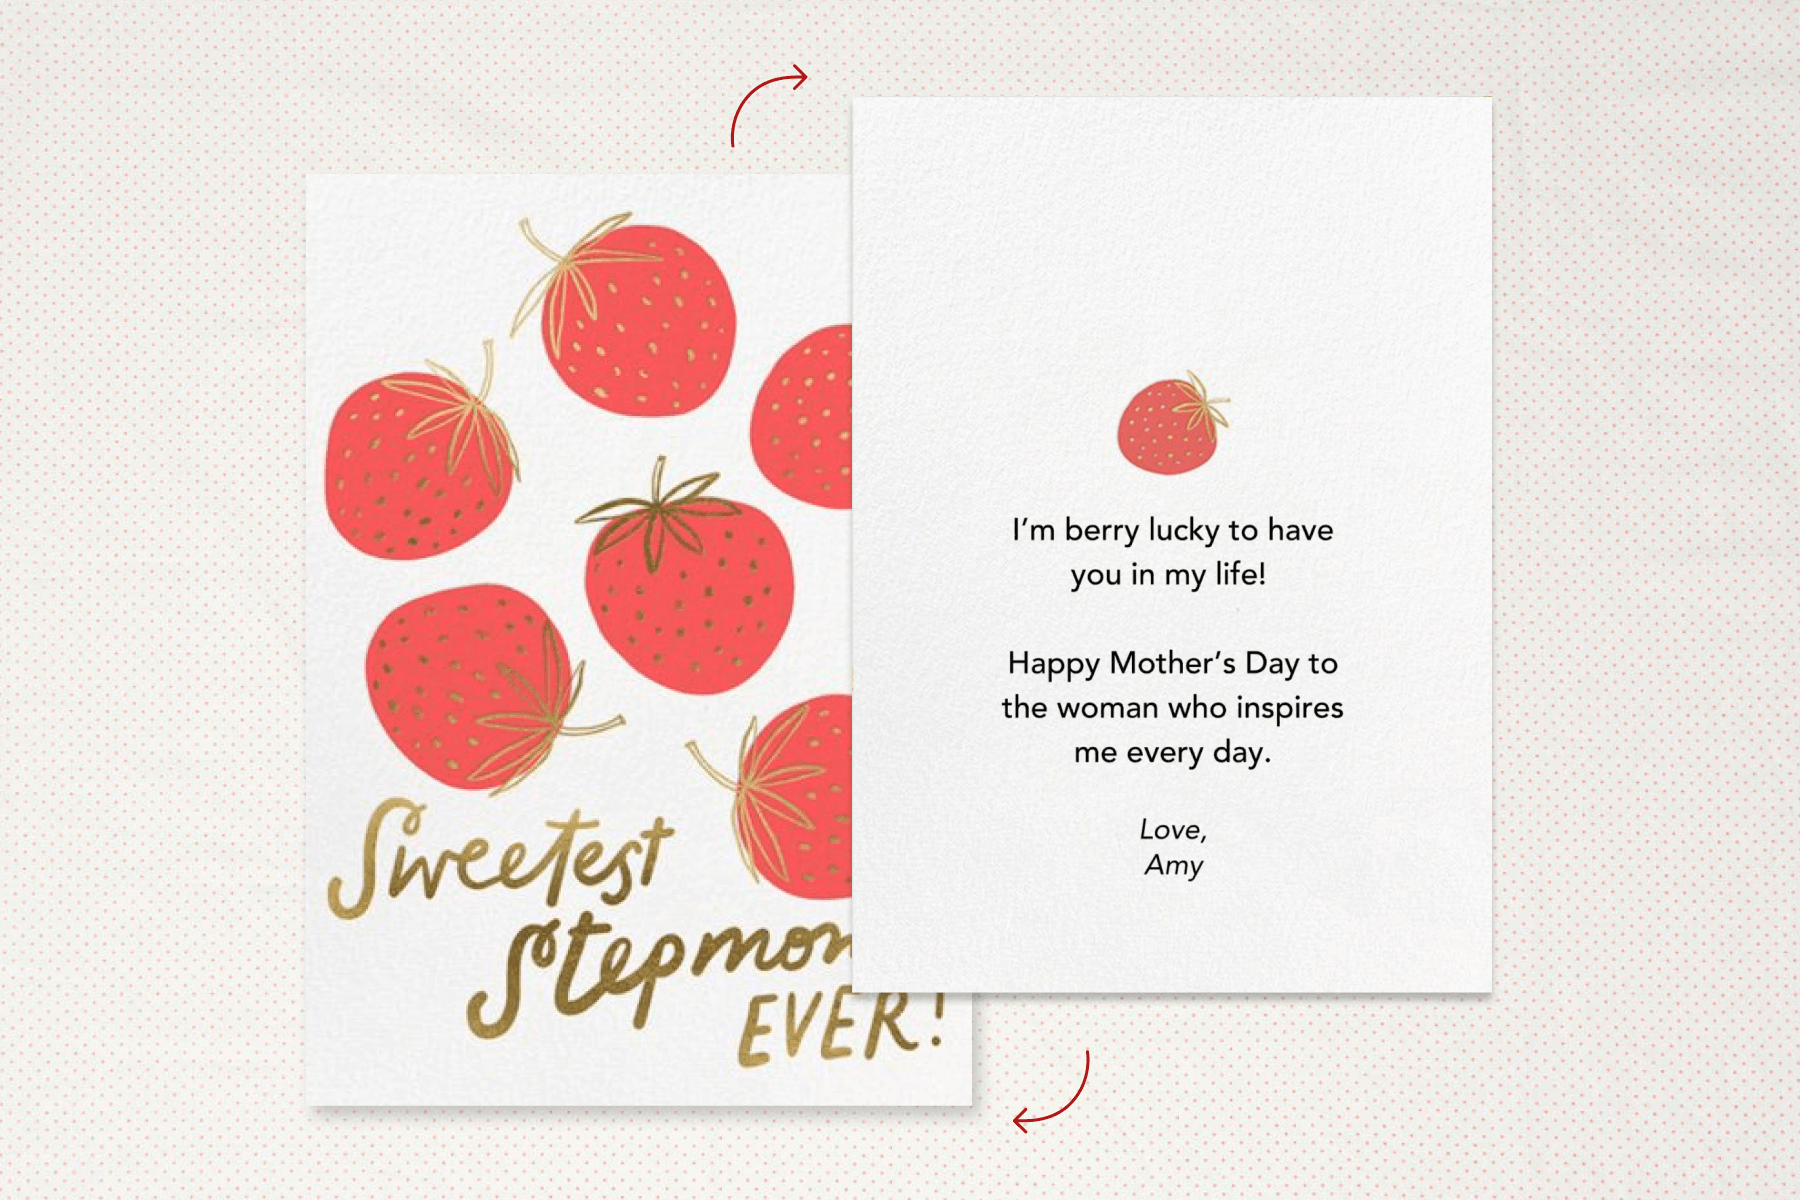 An illustrated strawberry Mother’s Day card showing one of the messages suggested below. The card reads “Sweetest Stepmom EVER!”